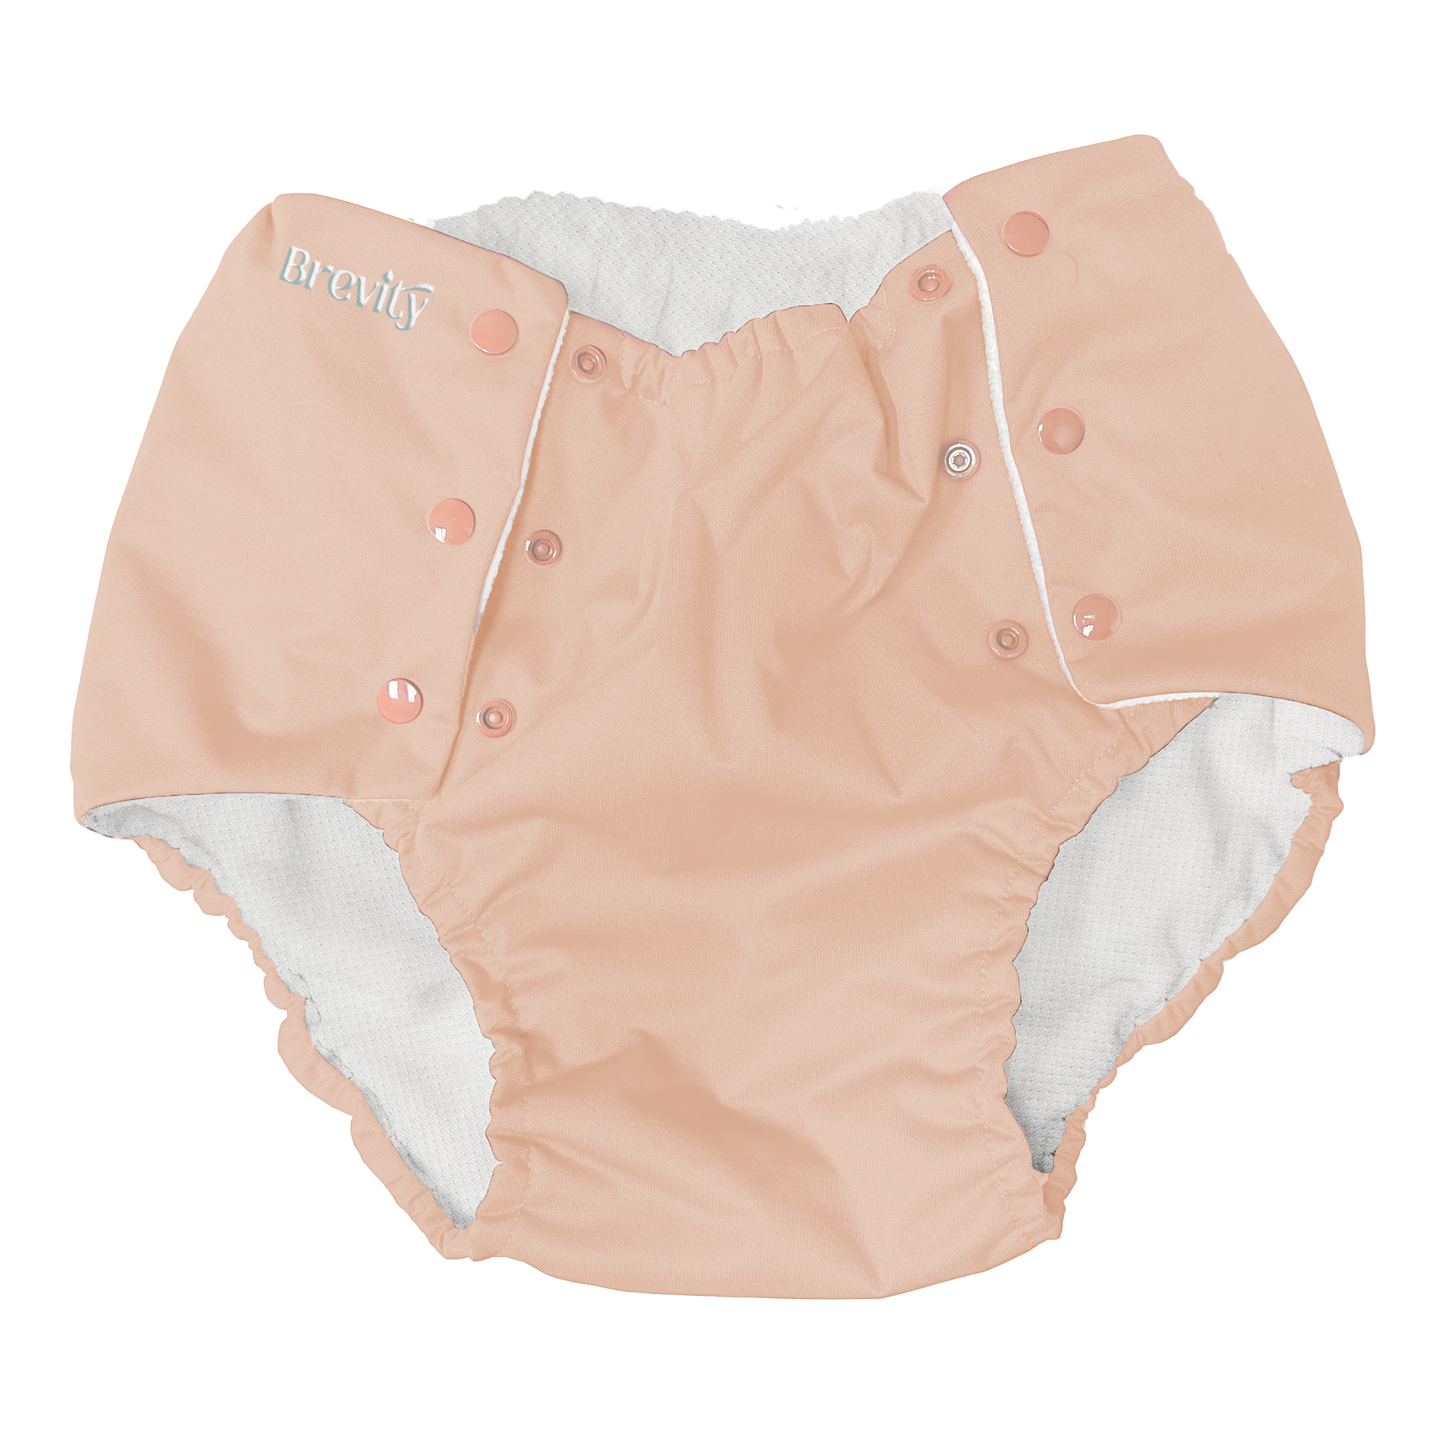 Adult Modern Reusable Incontinence Brief with Breathable Mesh Lining